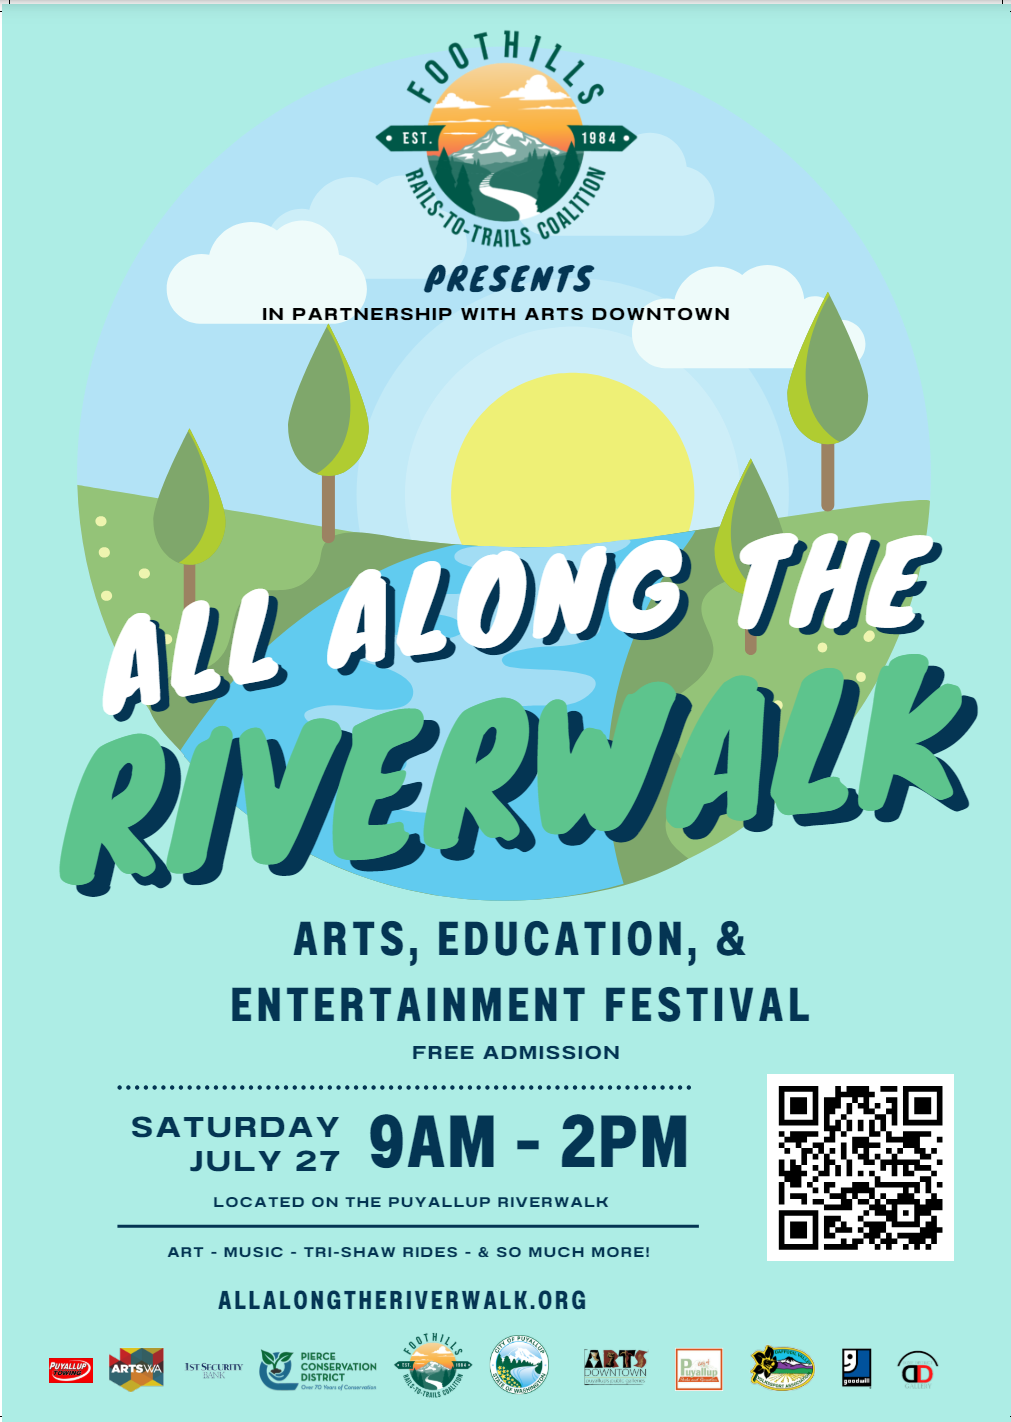 All Along the River Walk Art and Music Festival